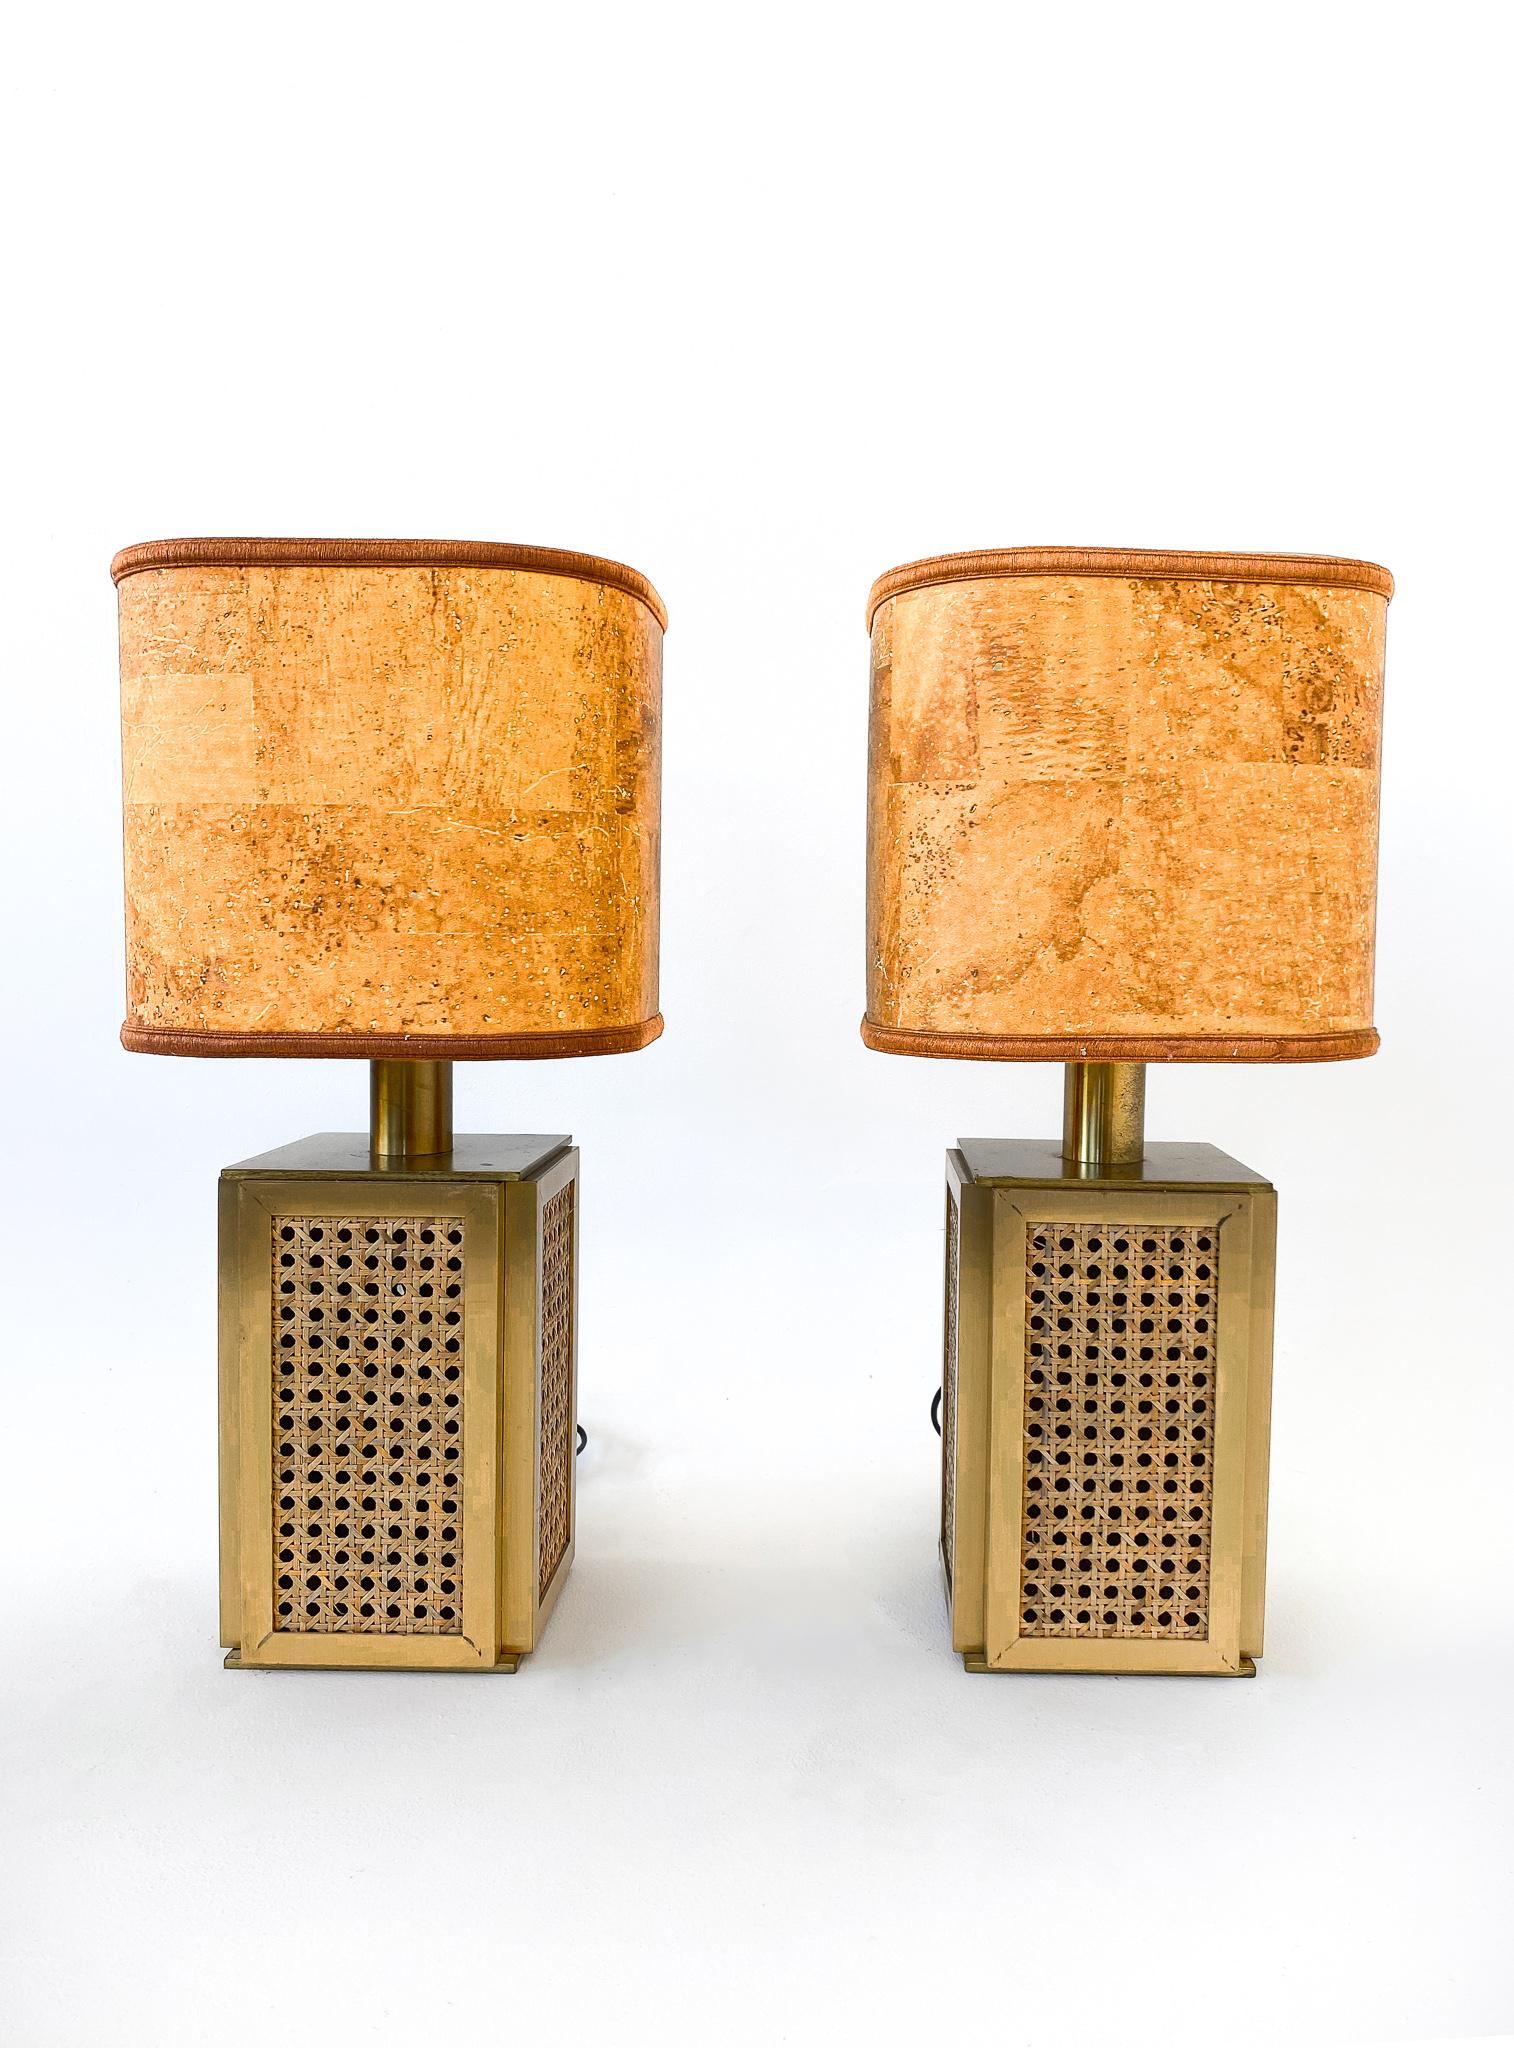 Mid century modern table lamps Corc shade, brass and cane base, Italy, 1970s.

A rare set of 2 large Italian Table lamps from the 70s in high qualitiy and in good vintage condition. The solid base of these lamps is made of brass and cane - also